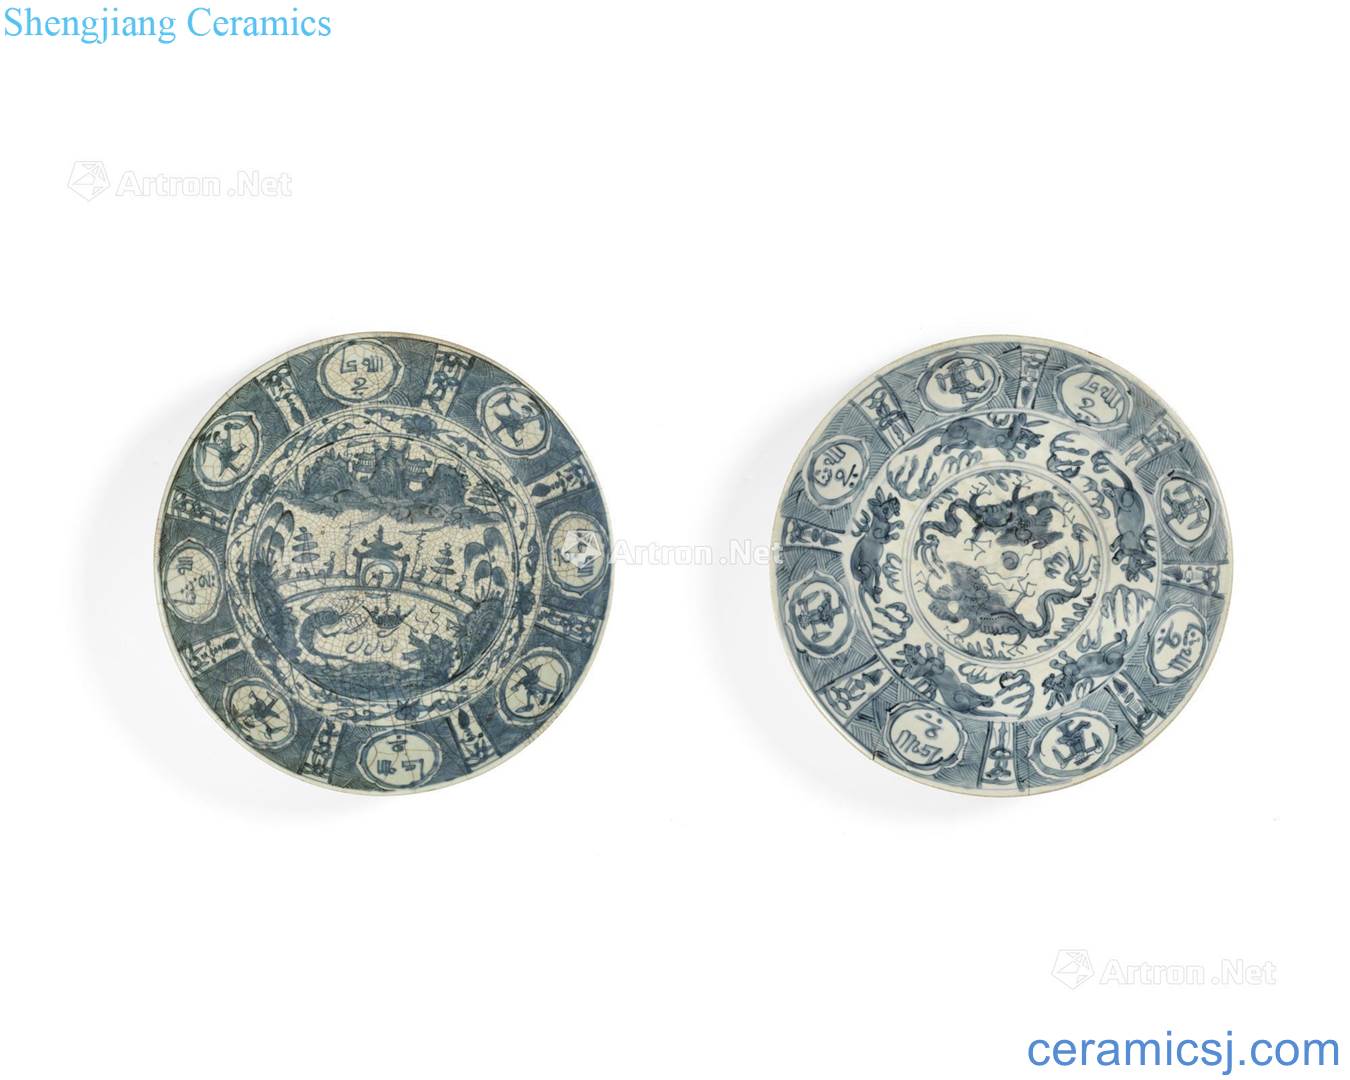 Ming dynasty blue and white medallion export 16th/17th century islamic figure plate of a group (or two)